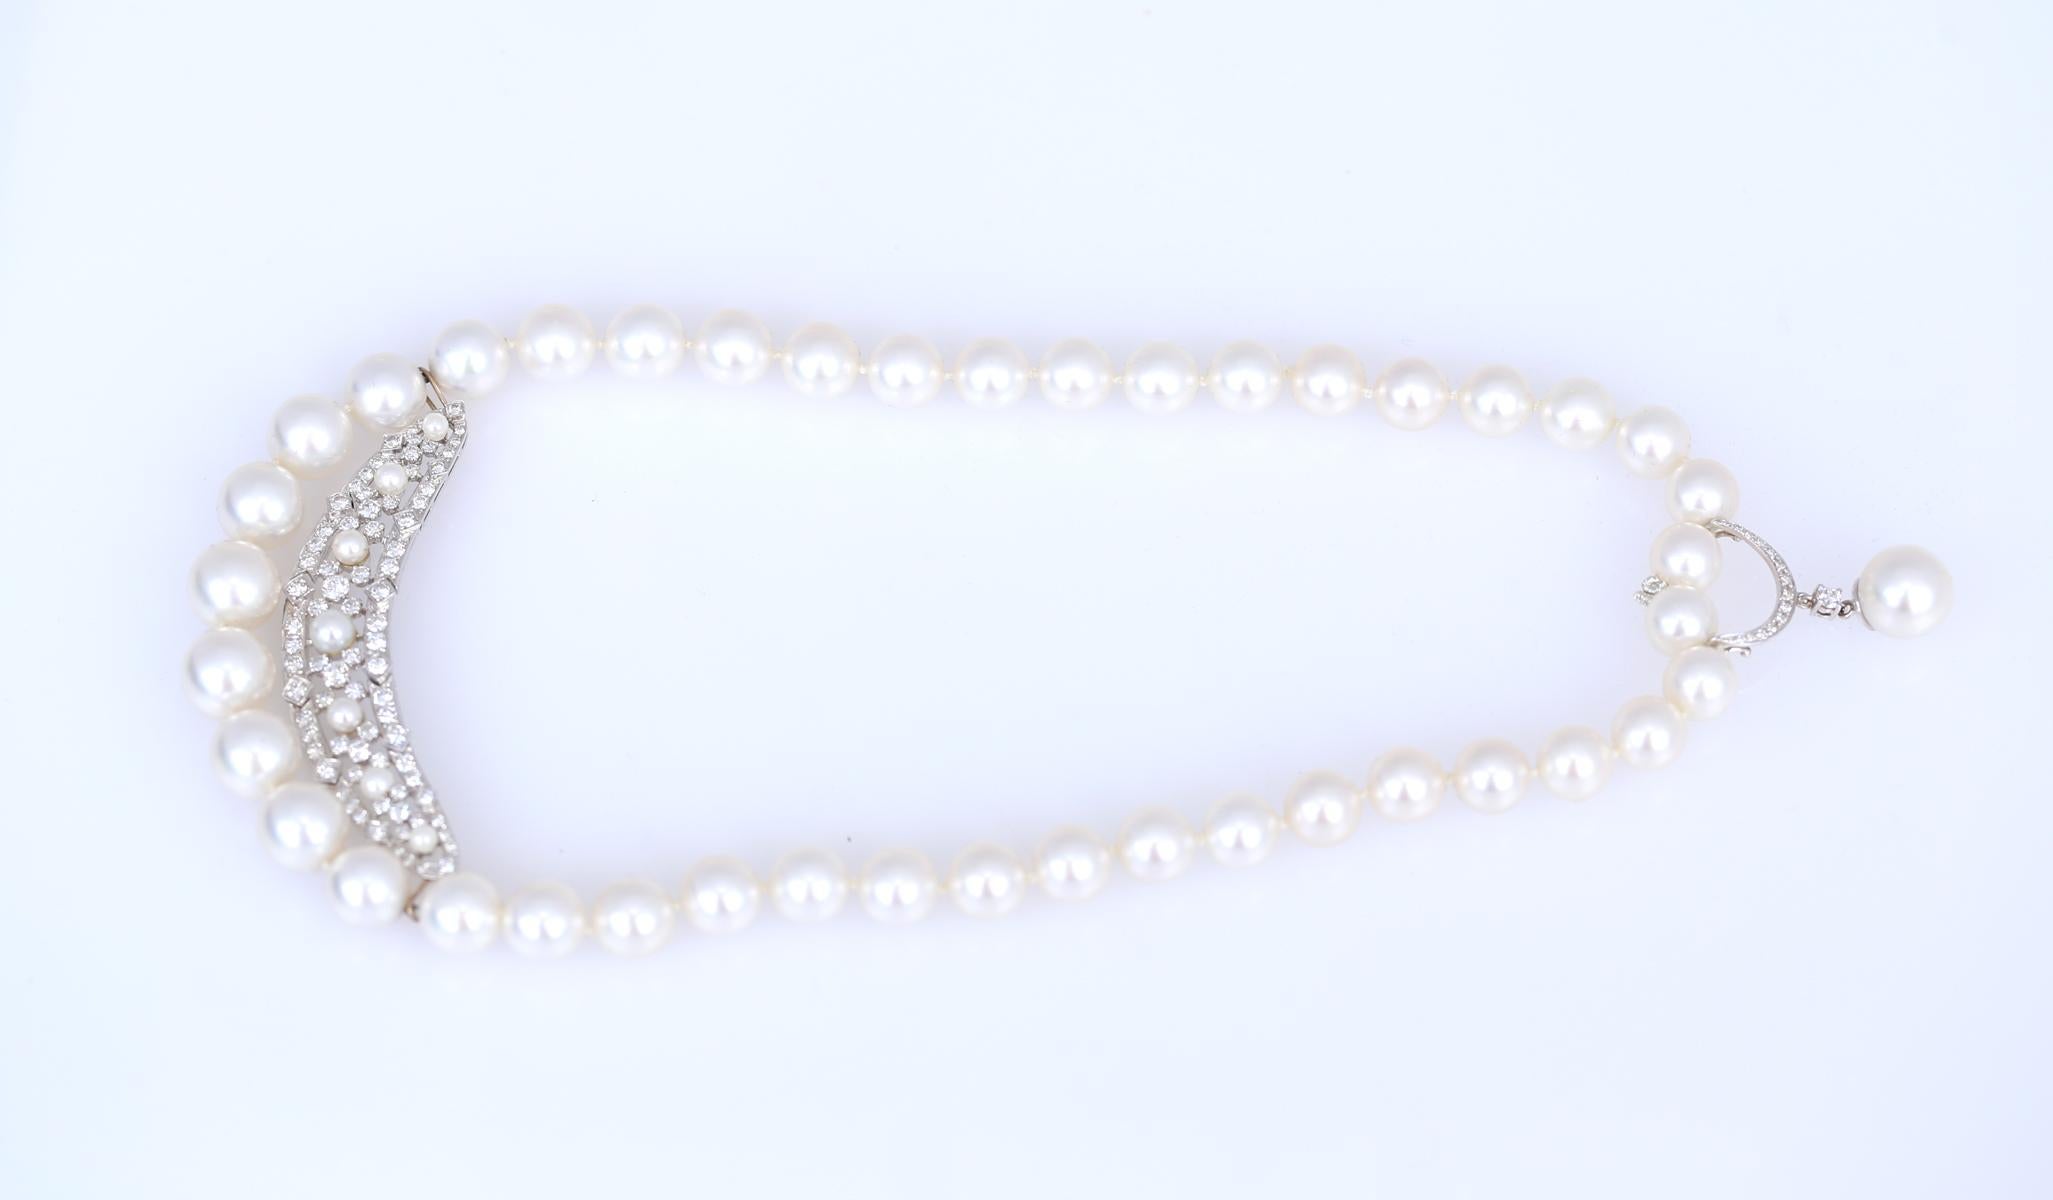 Pearls Diamonds 2.5 Carat Necklace AAA Quality, 2020 For Sale 3